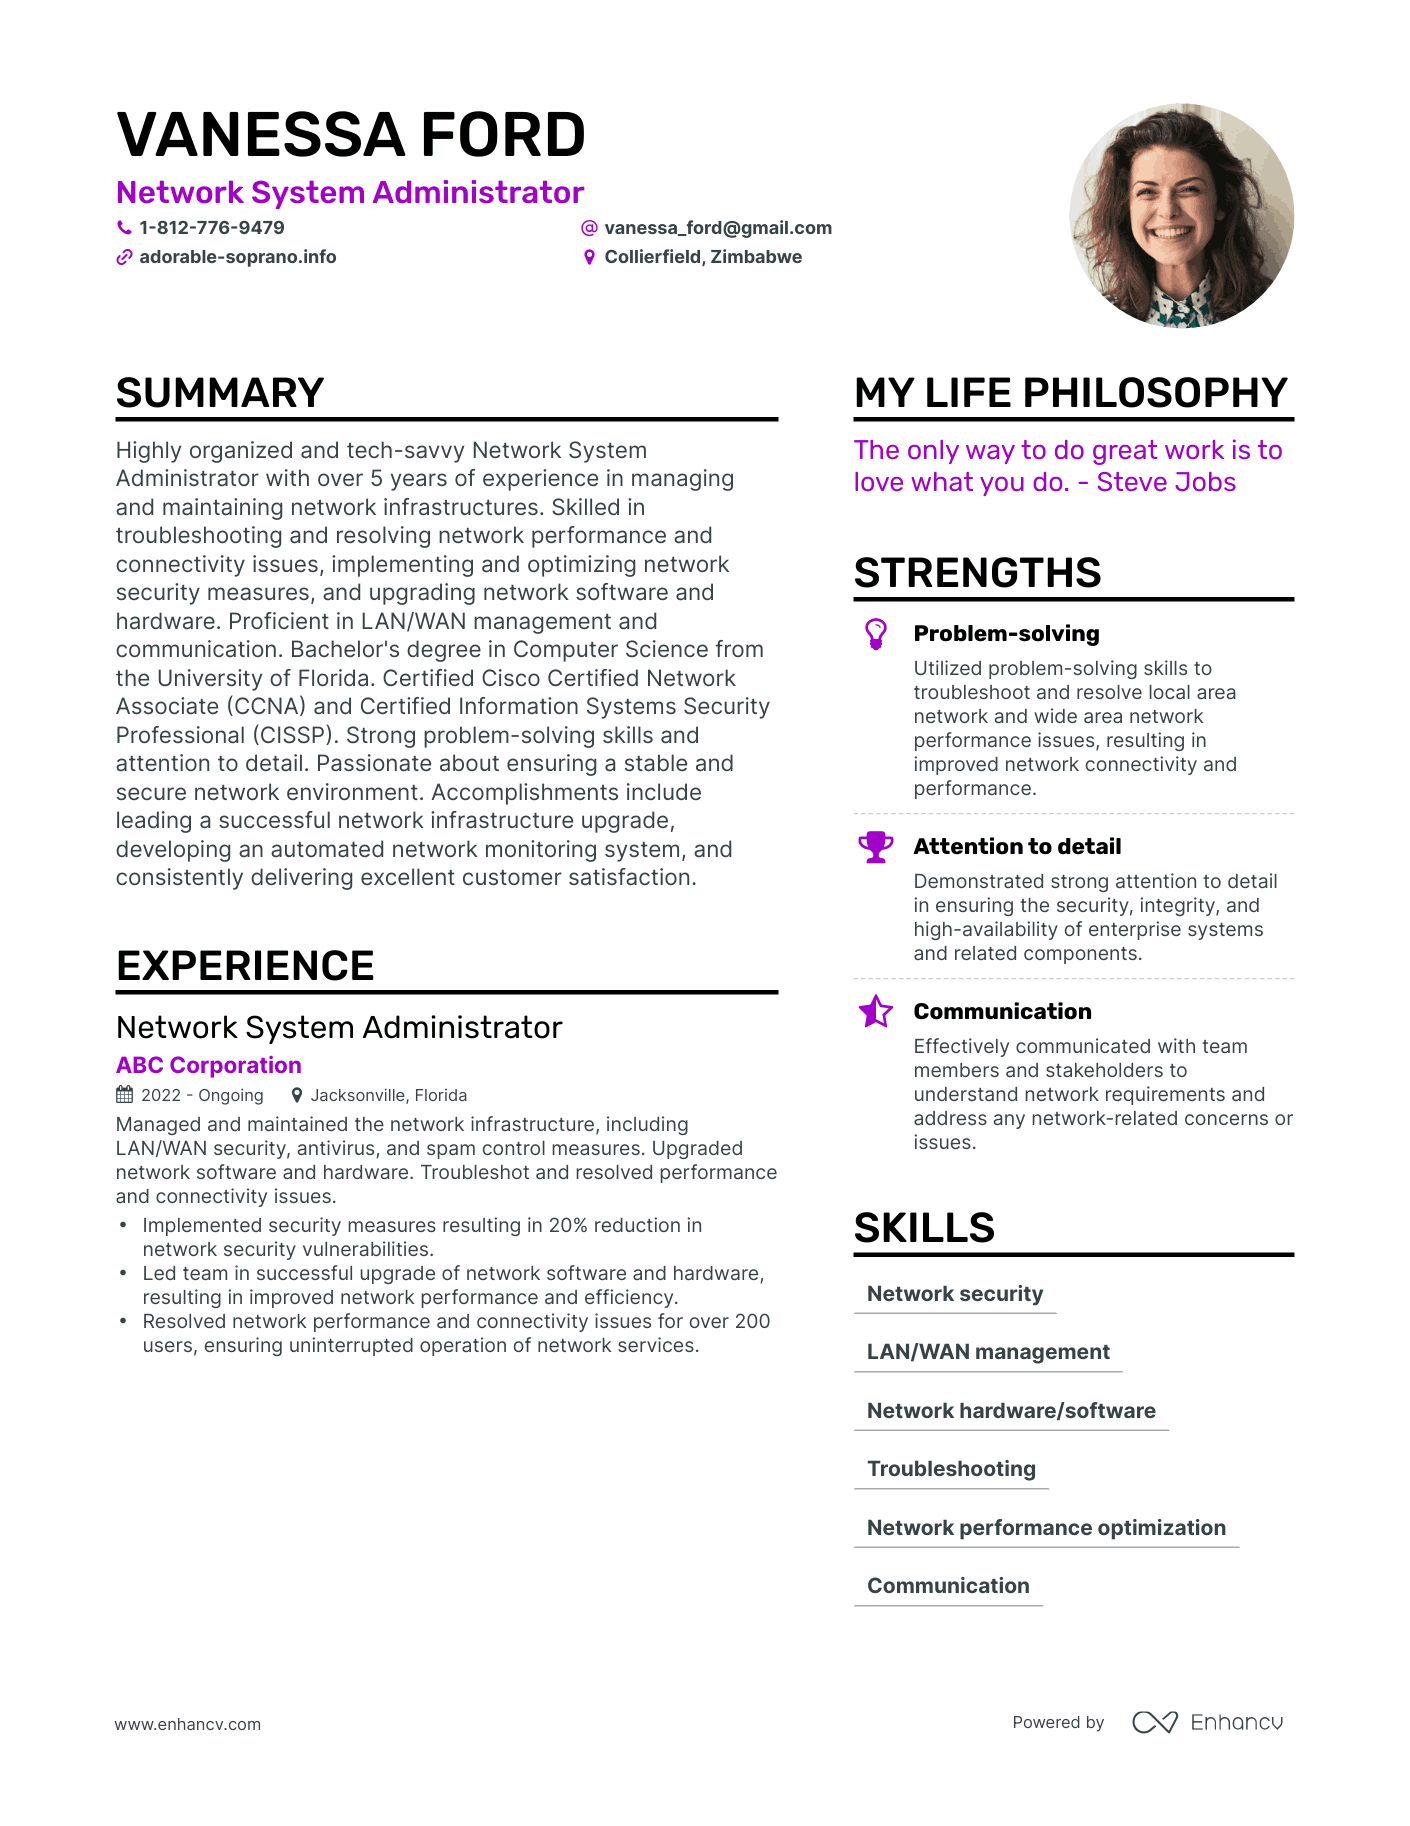 Network System Administrator resume example